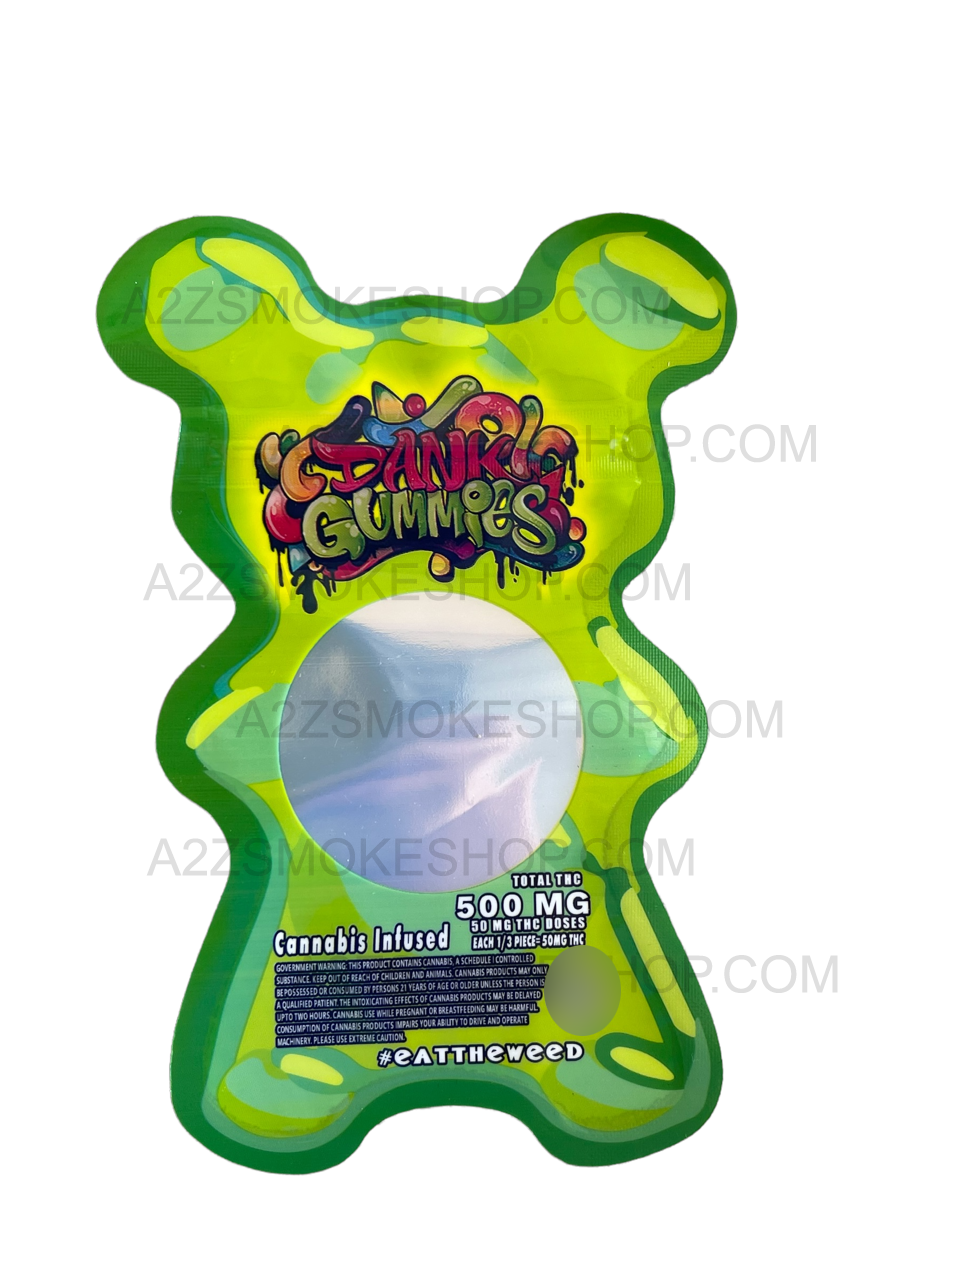 Dank Gummies Cut out 500mg  Mylar Bag with window  Green- Packaging Only